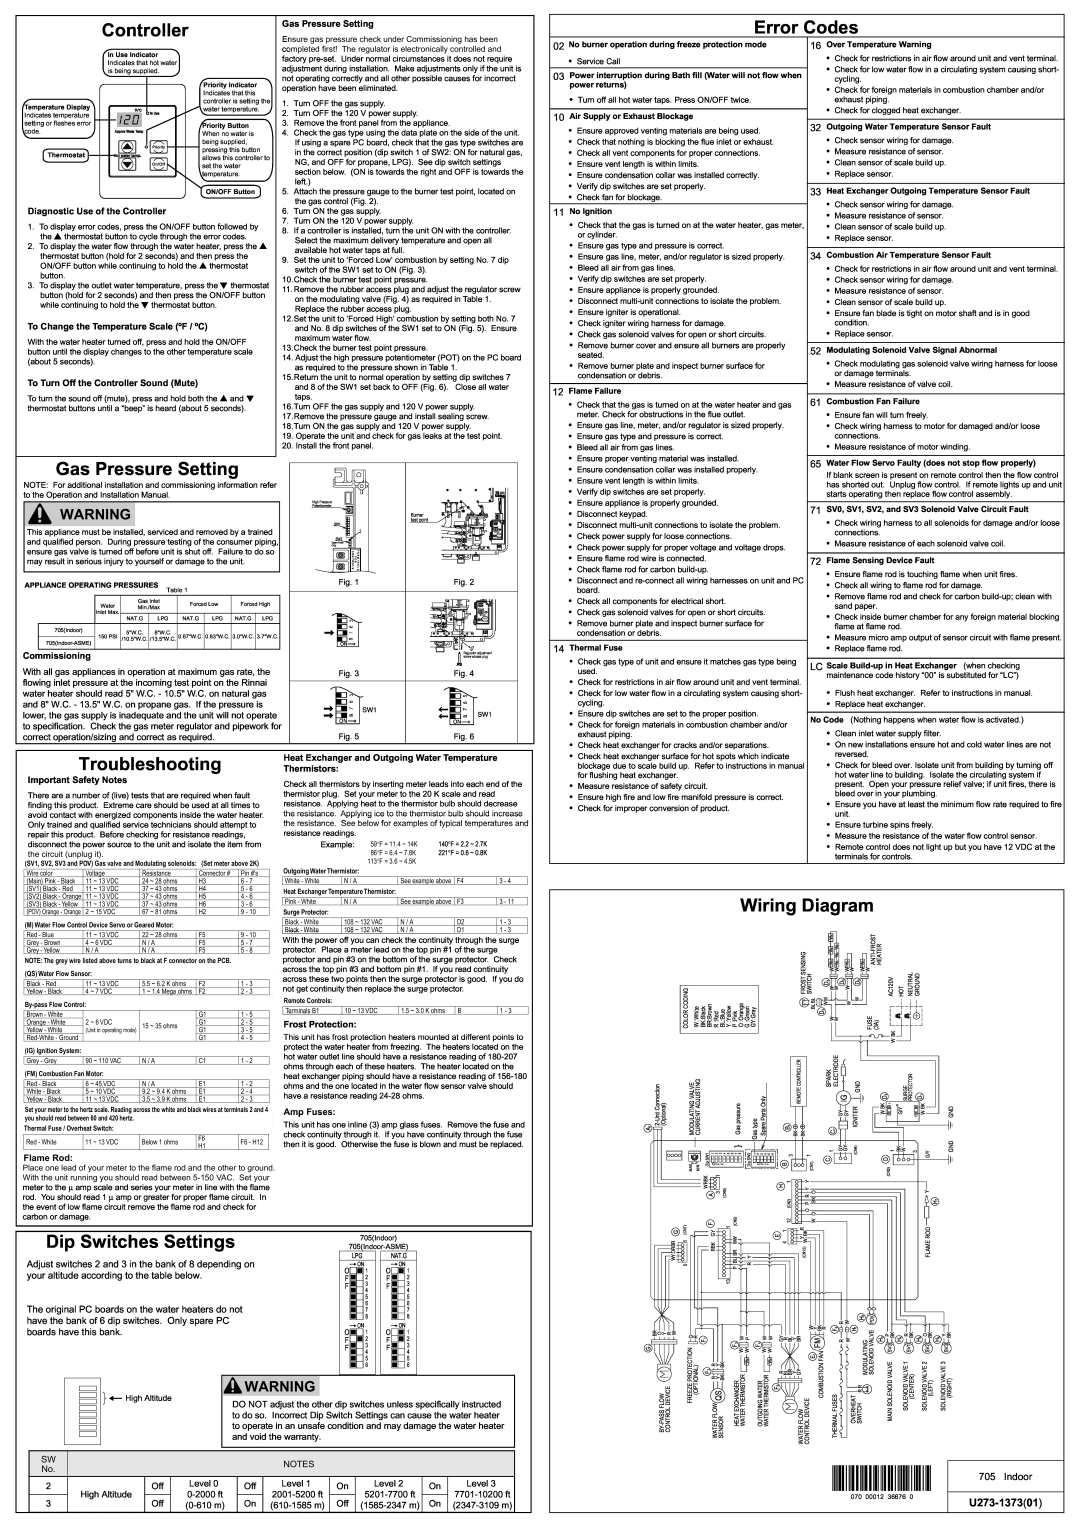 American Water Heater 701022, 705 installation manual Controller, Gas Pressure Setting, Troubleshooting, Wiring Diagram 